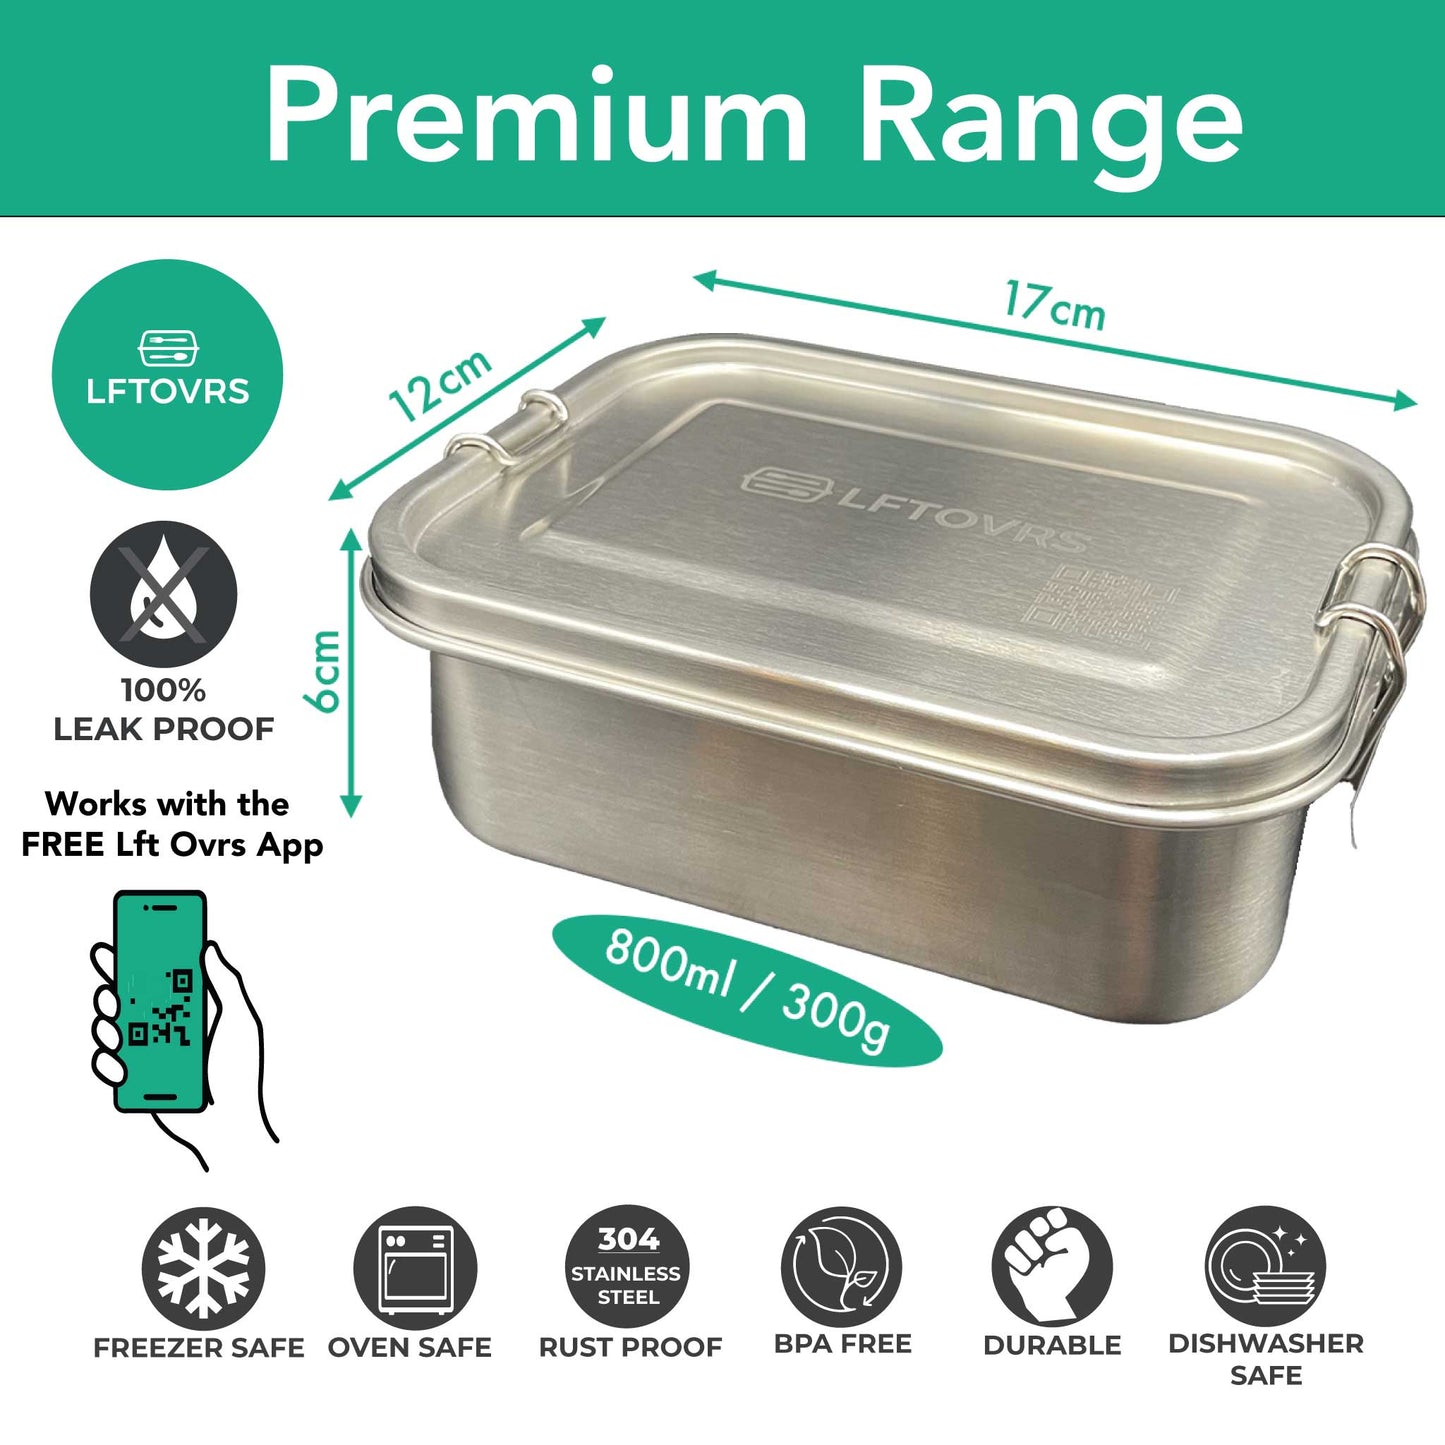 800ml leakproof lunch box features